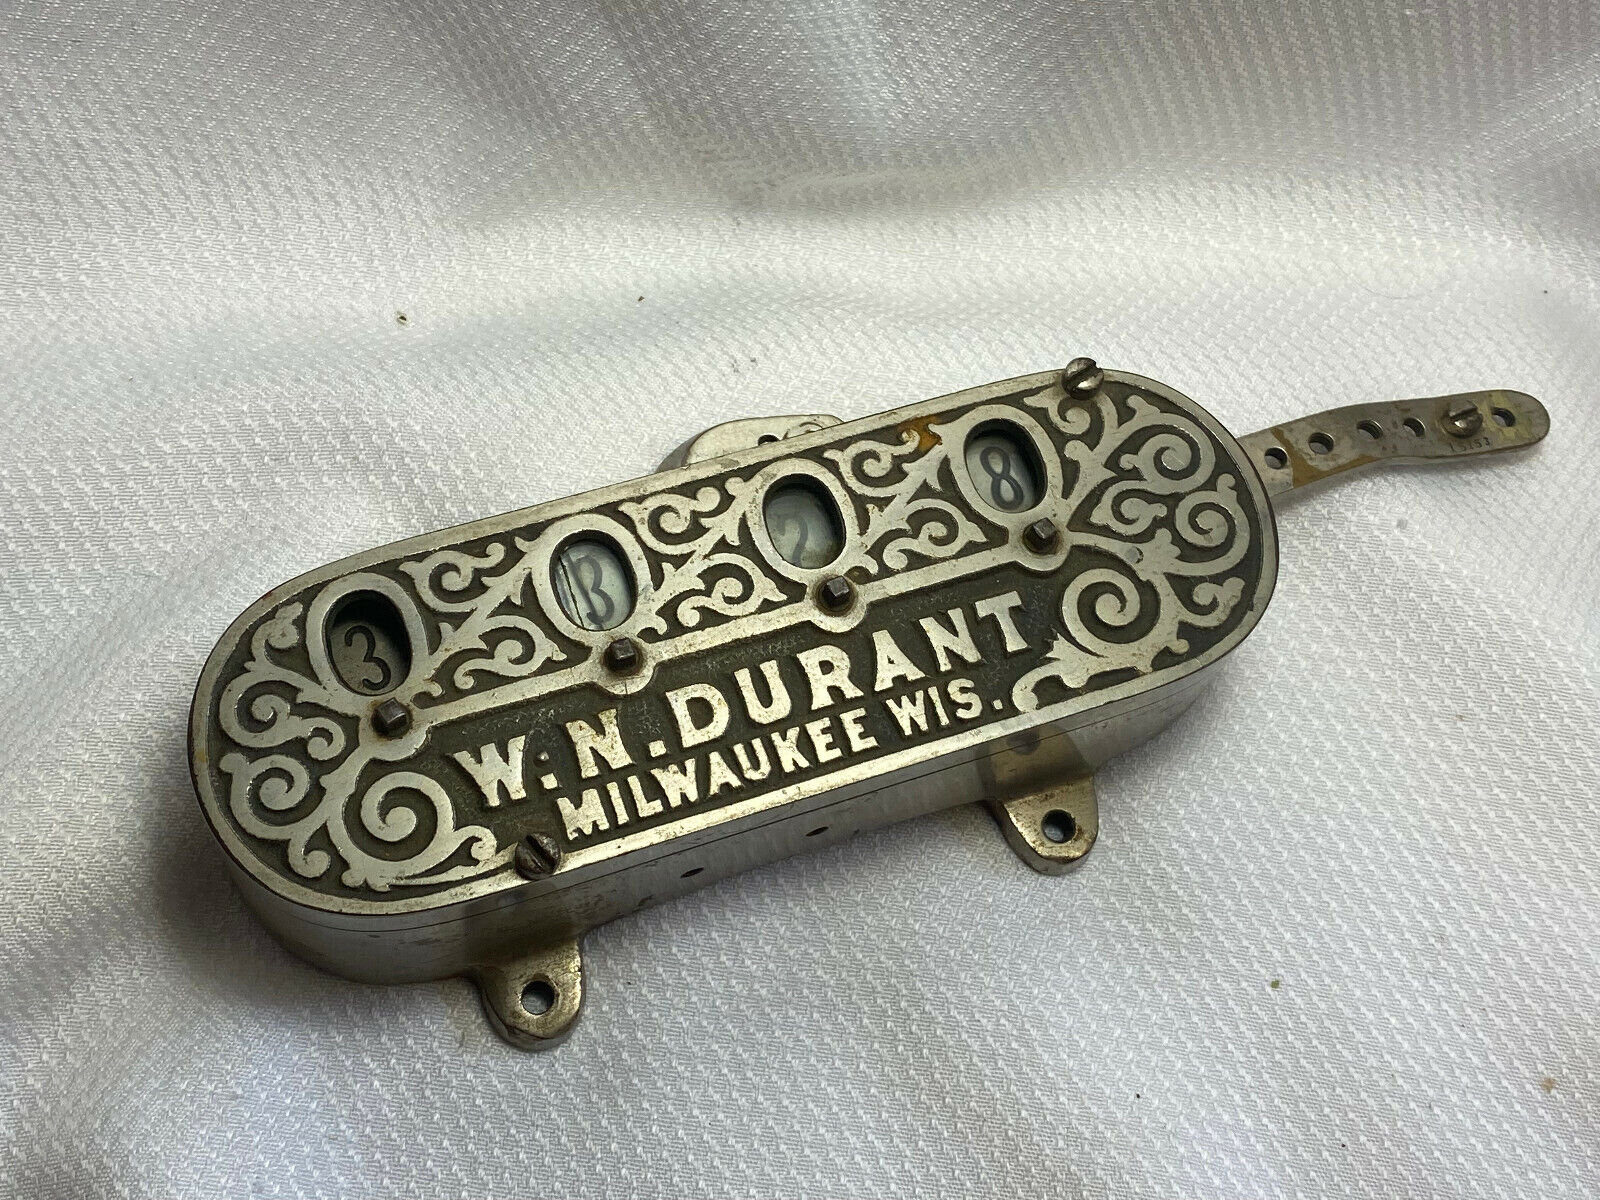 Vtg W.N. Durant Milwaukee Wis. Ornate Embossed Scroll Trolley Car Counter #15163